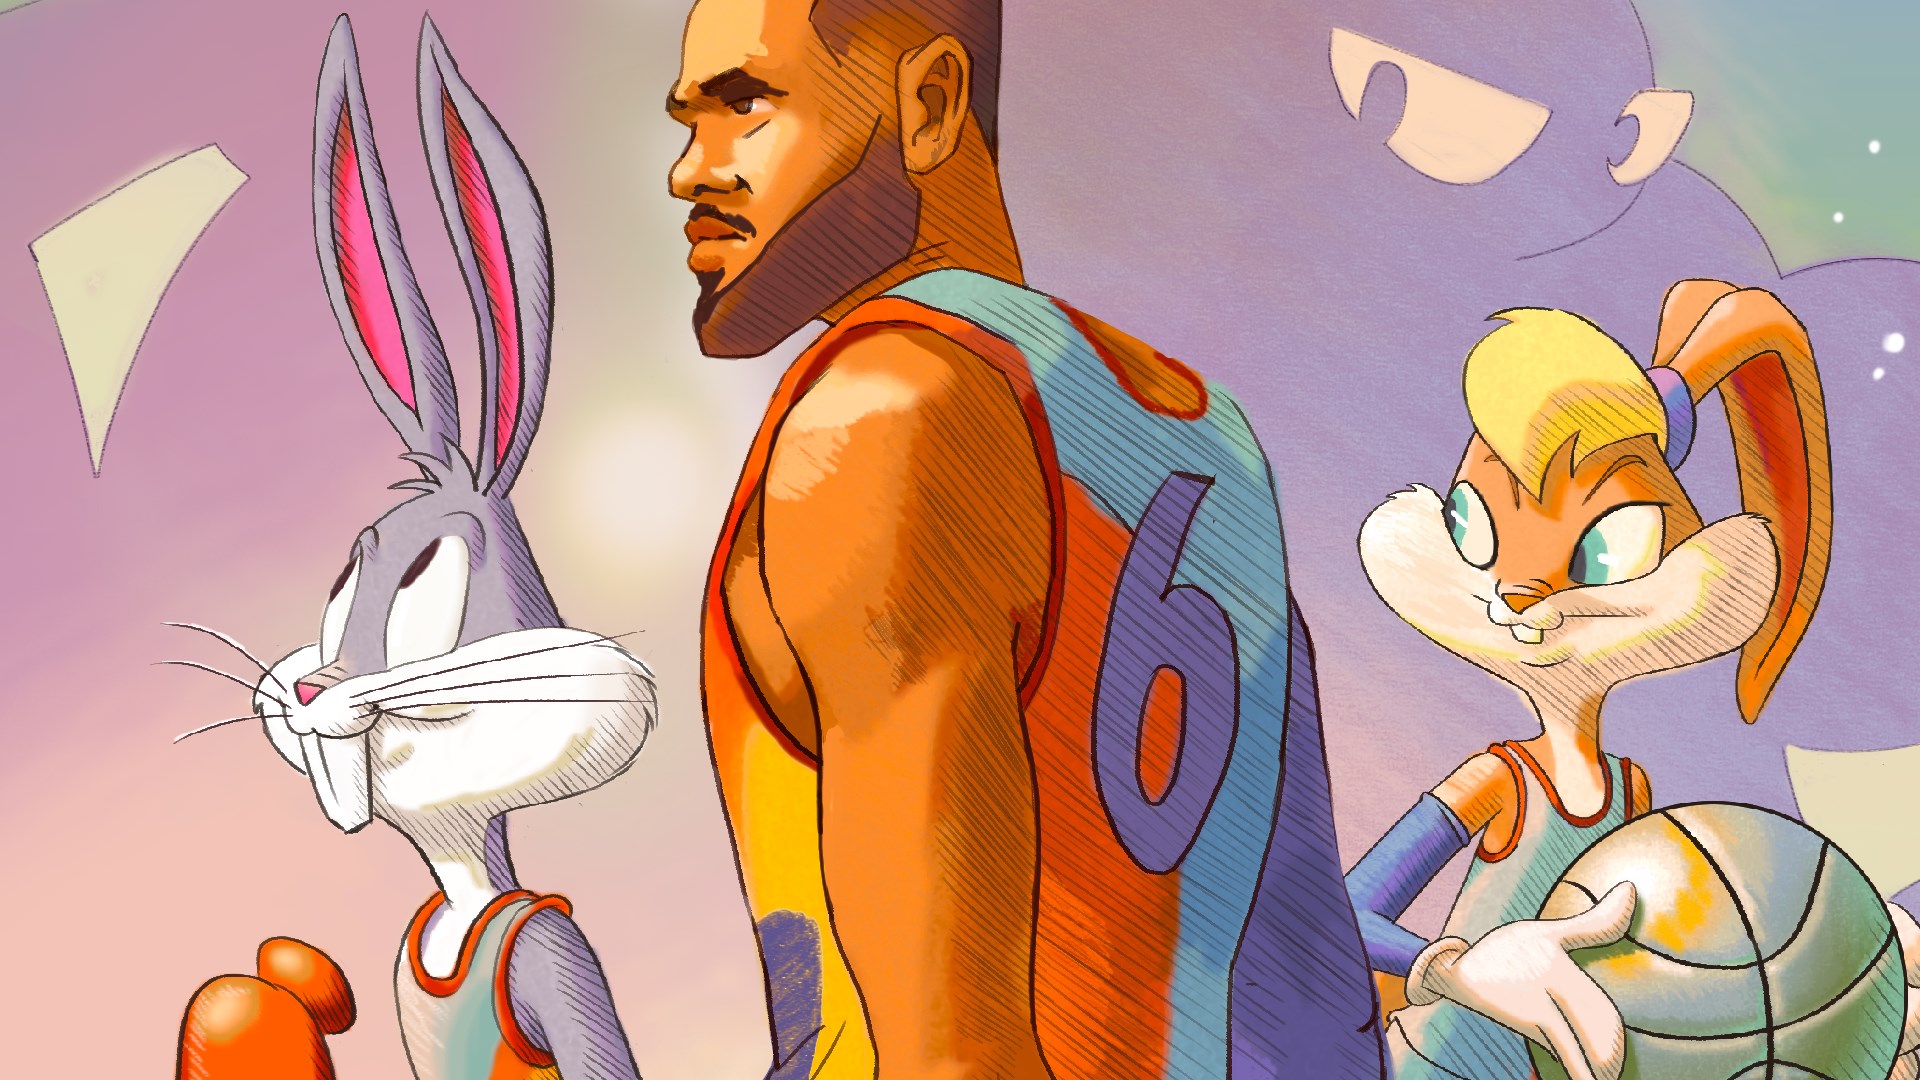 Space Jam: A New Legacy - The Game Is Now Available For Xbox One